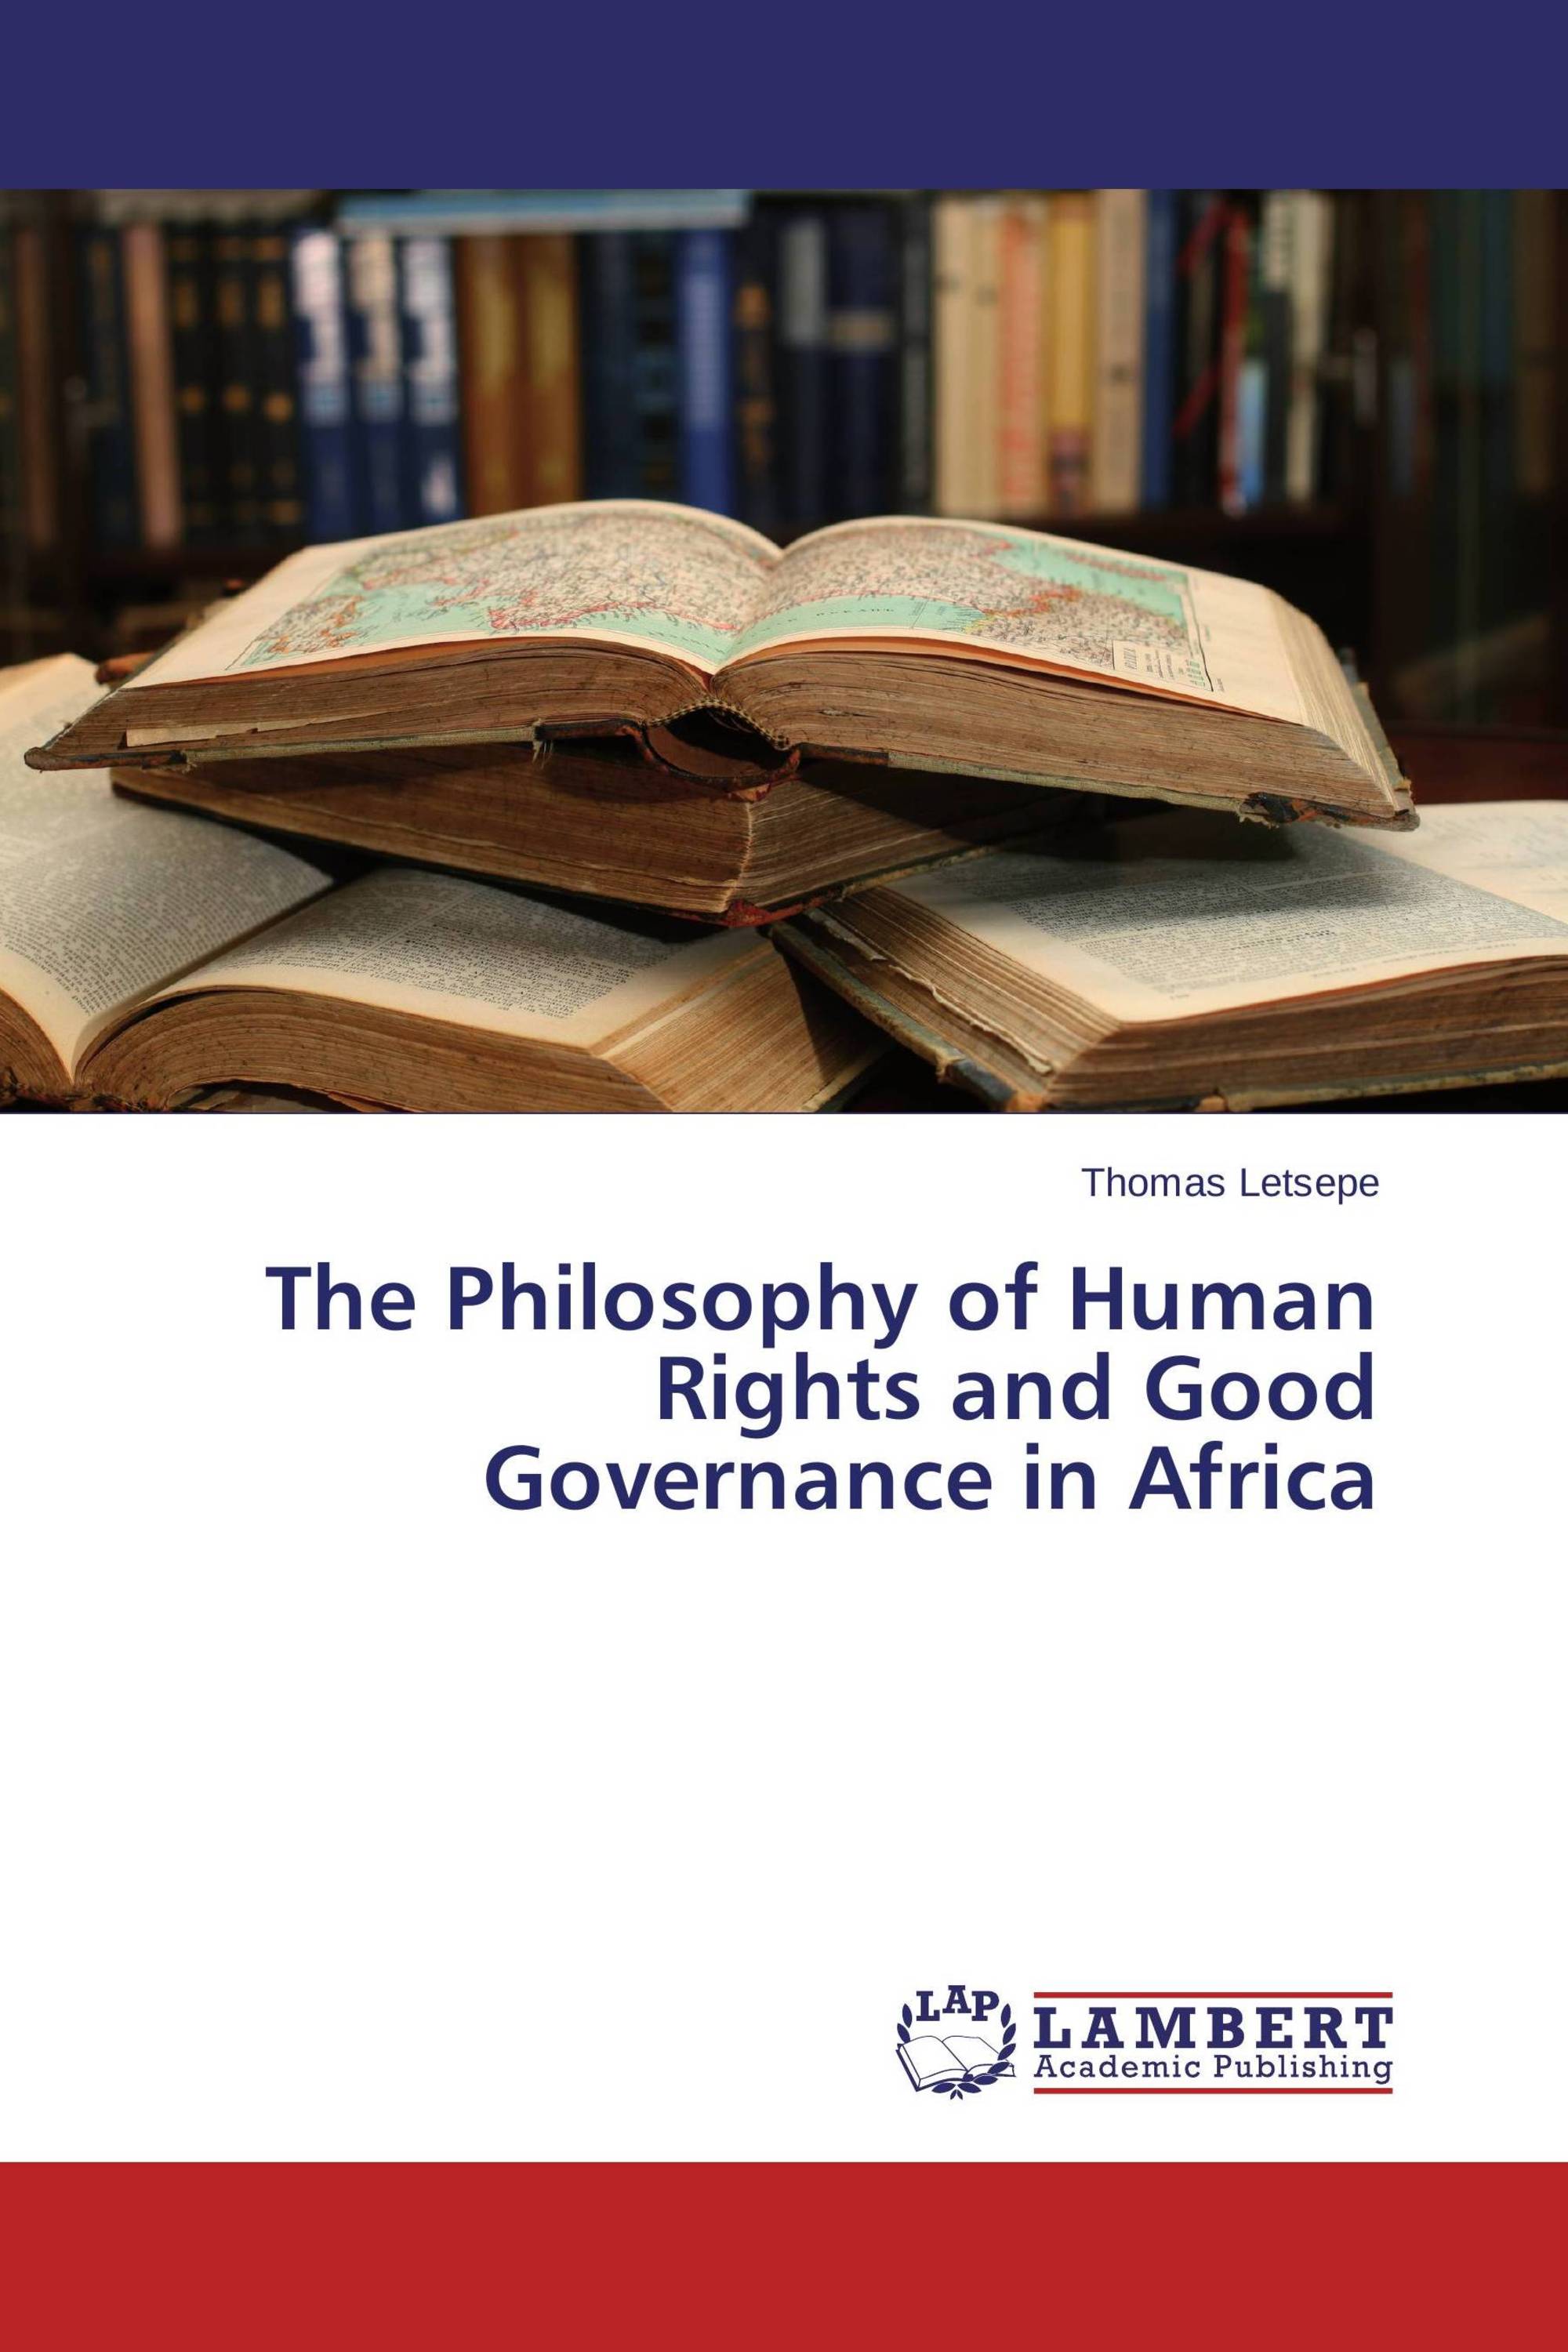 essay about the relationship of good governance to human rights